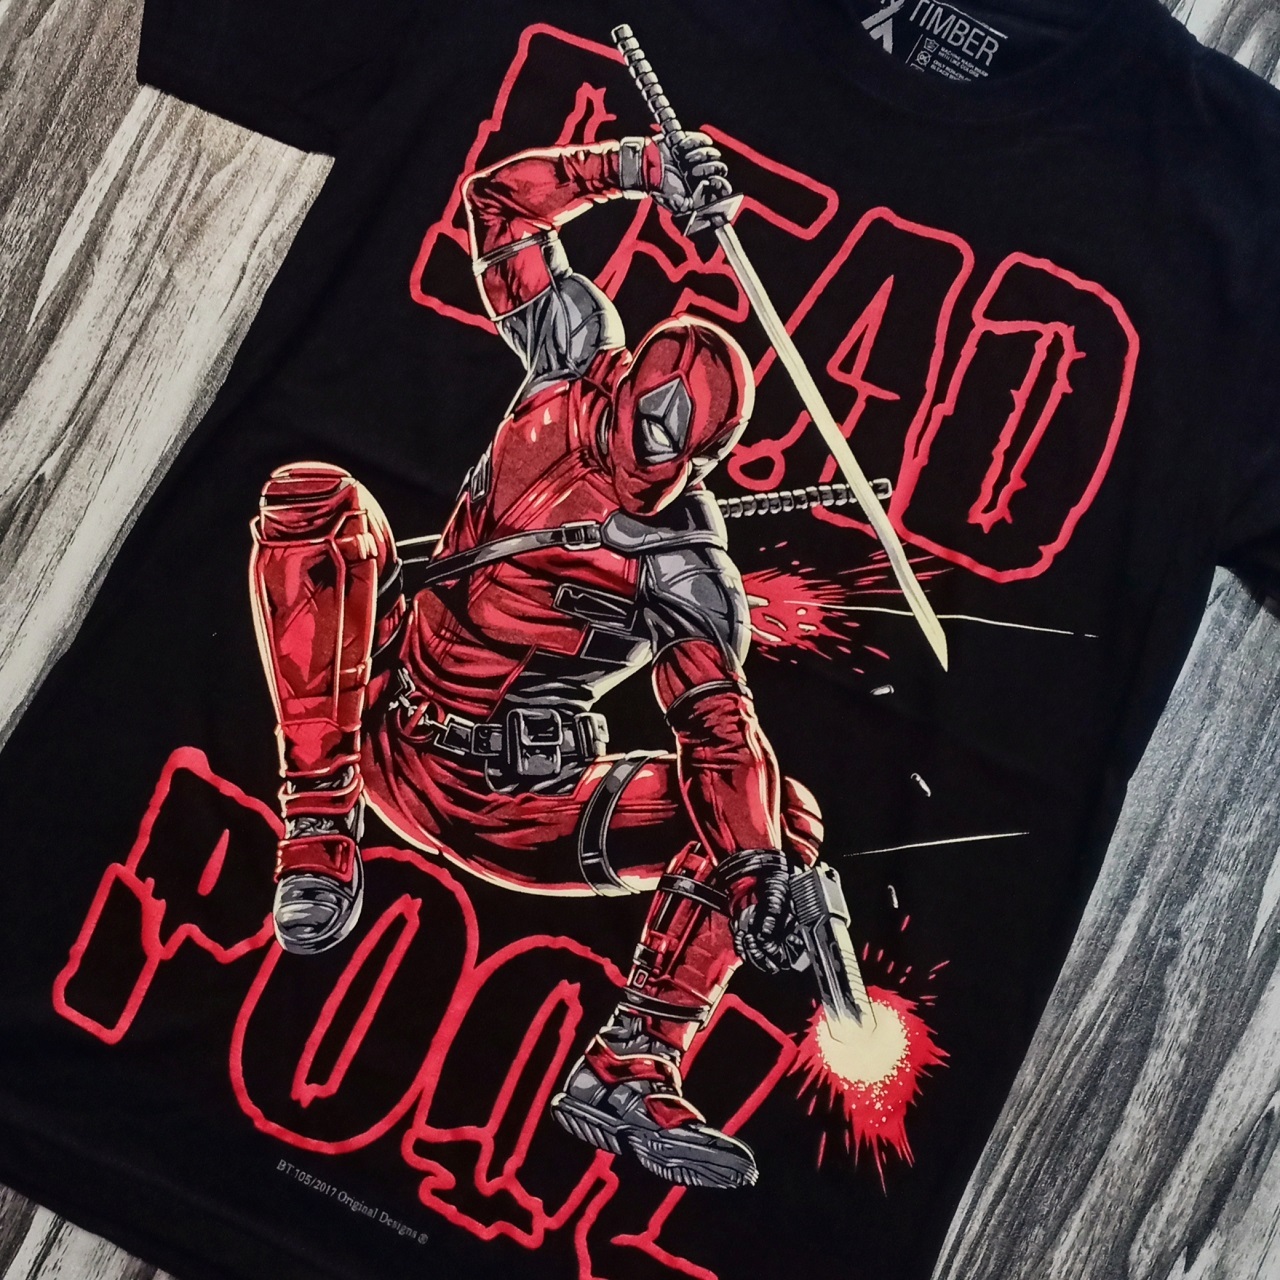 BT105 DEADPOOL 2017 MARVEL UNIVERSE HERO MOVIE SPECIAL COLLECTORS EDITION  ORIGINAL BLACK TIMBER COTTON T-SHIRT – PREMIUM GRADE BLACK TIMBER NEW TYPE  SYSTEM MOAI SPEED HIGH QUALITY SILK SCREEN COLLECTABLE T-SHIRT STORE